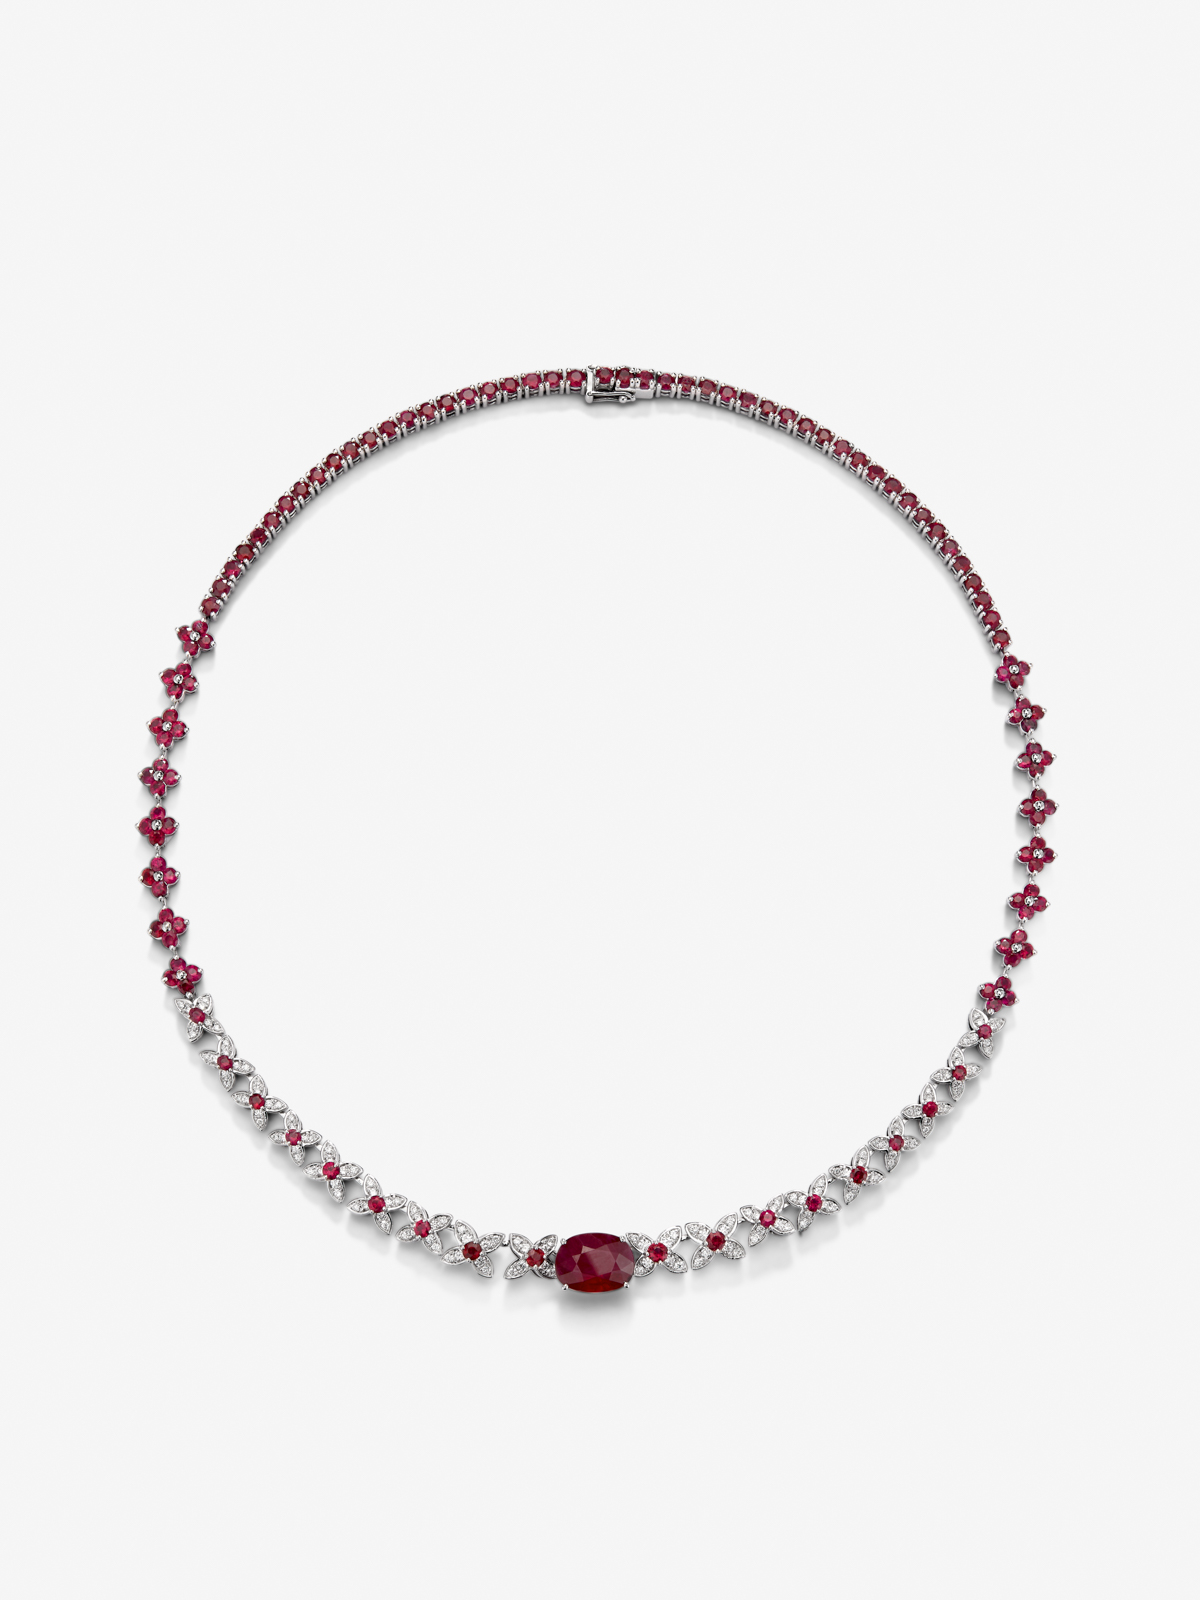 18K white gold necklace with red ruby ​​blod in 5,04 cts oval size, red ruby ​​in 13 cts and white diamonds in bright size of 1.11 cts